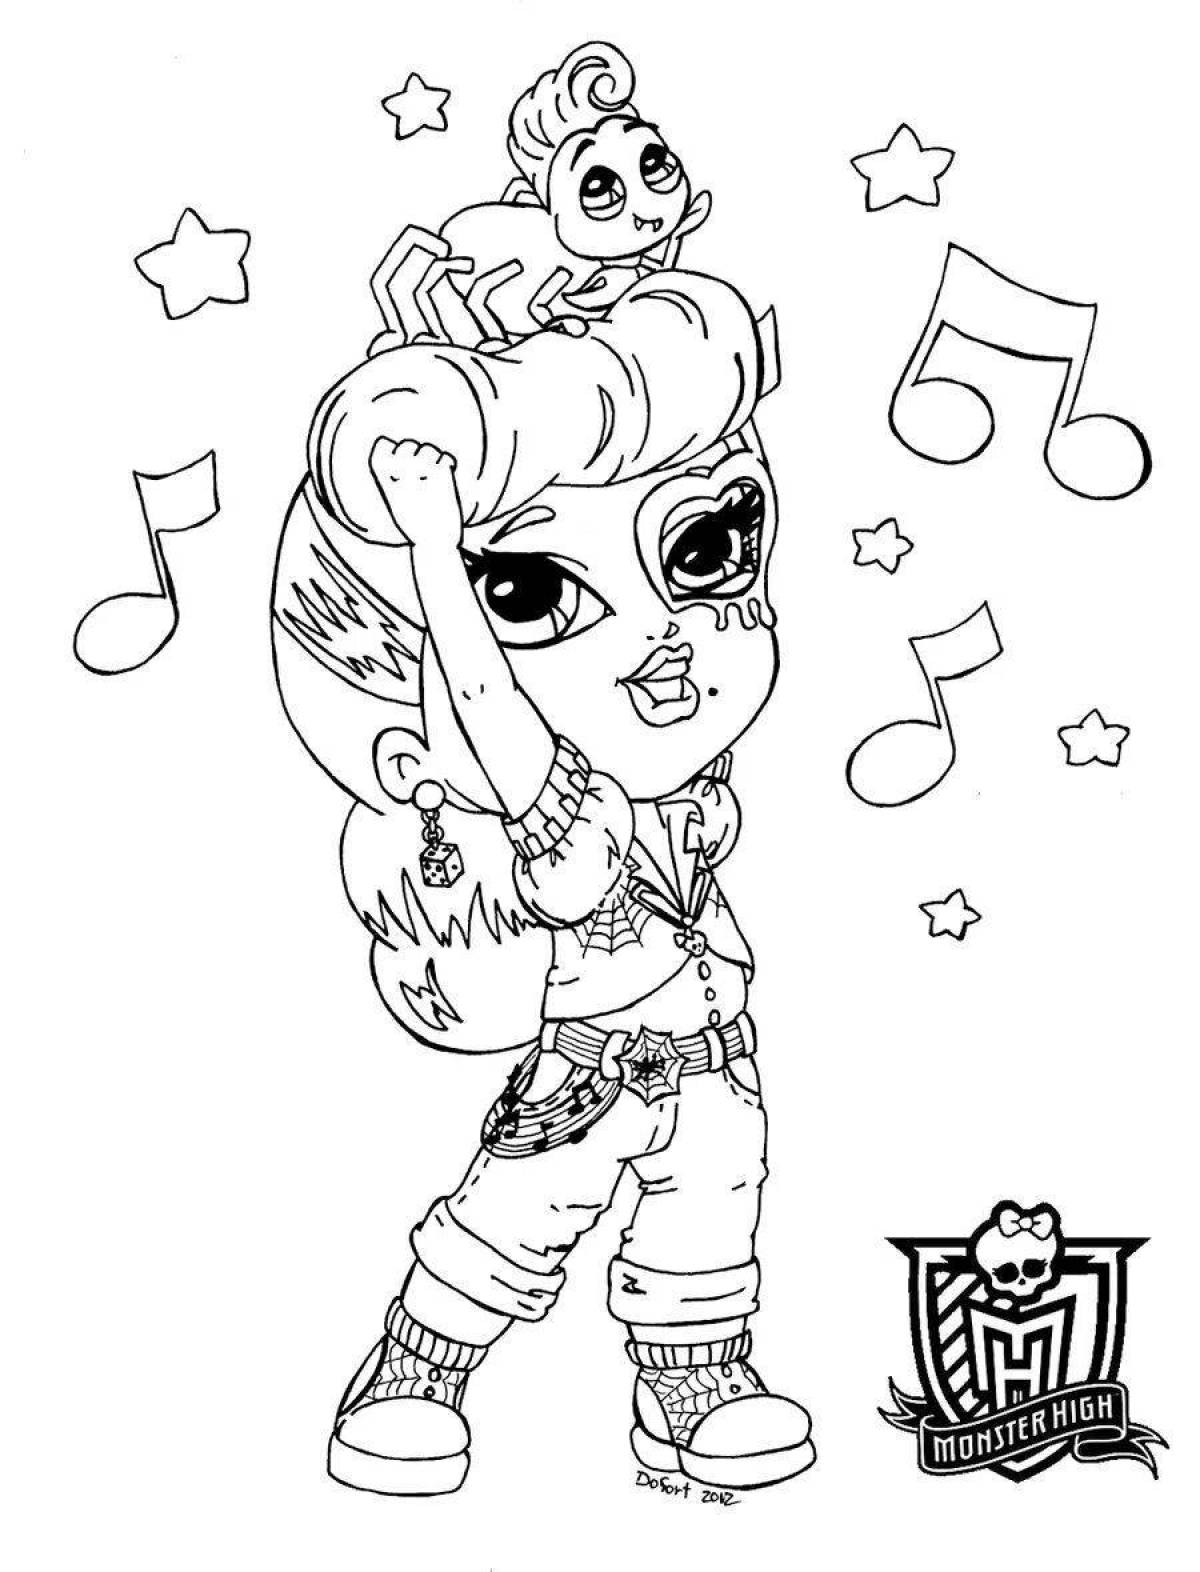 Boxy boo monster live coloring page